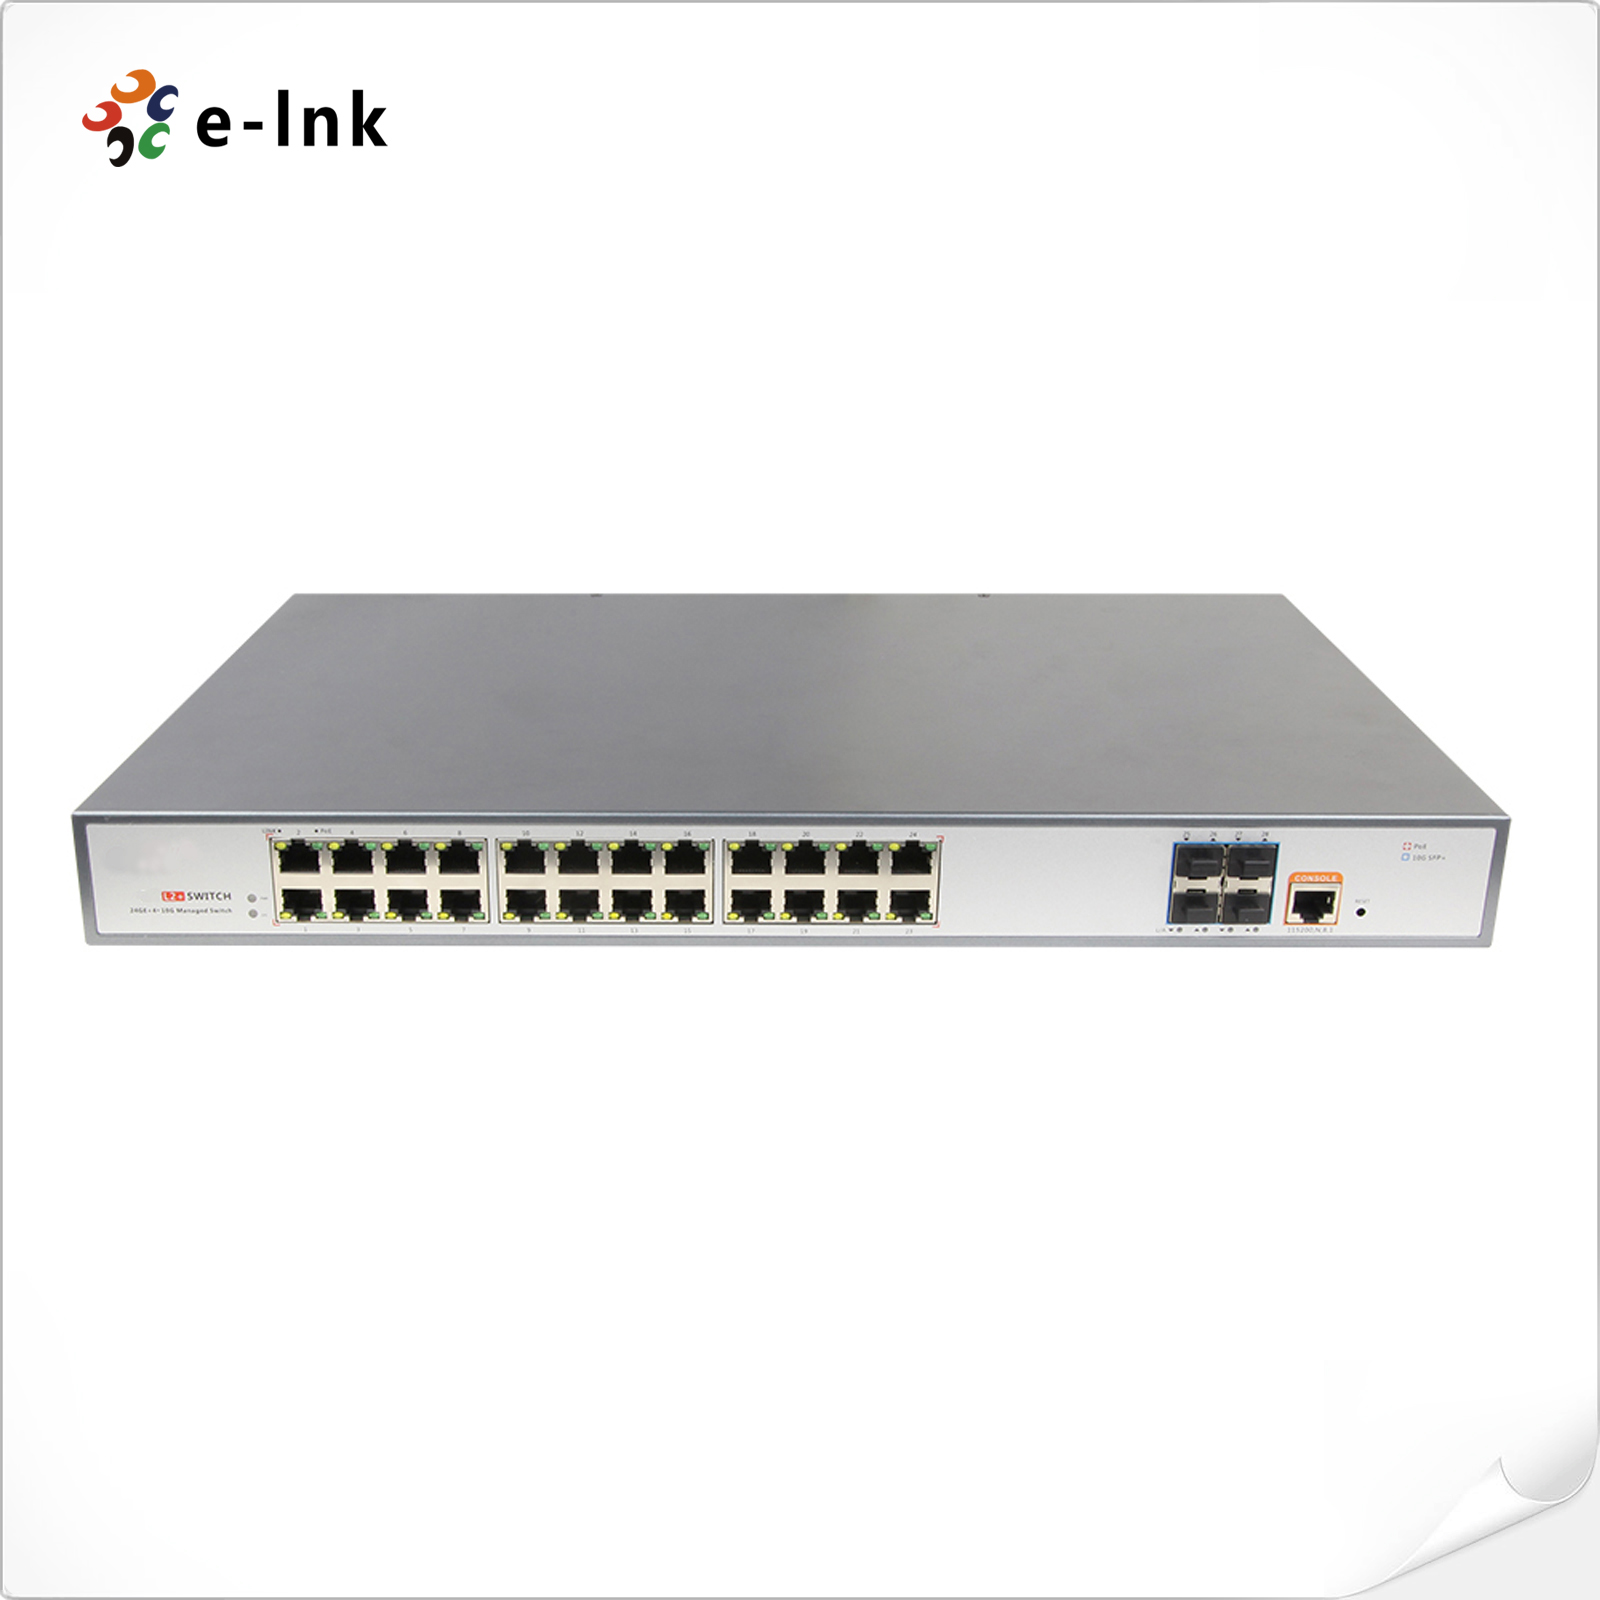 24 ports 10/100/1000Mbps Layer 2 Network Managed Switch with 4x10G SFP ports